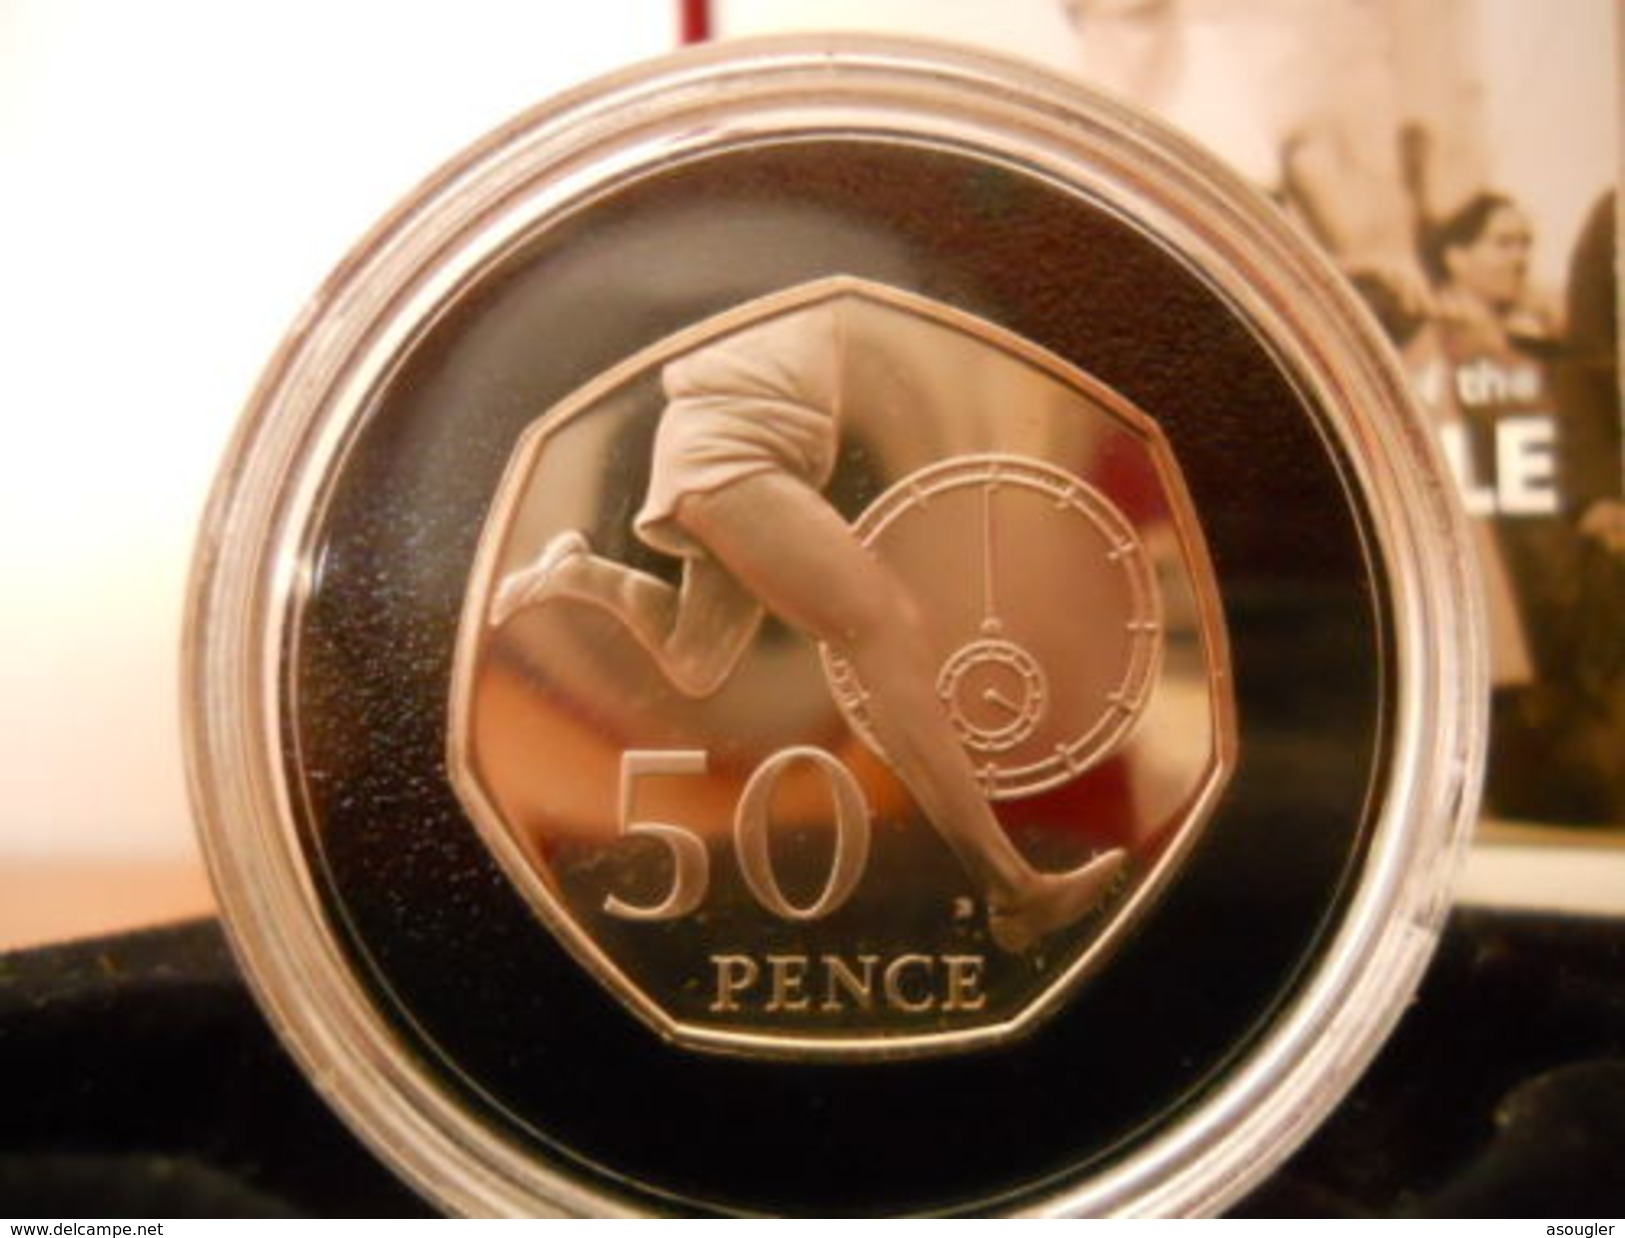 UK GREAT BRITAIN 50 PENCE 2004 SILVER PROOF "50 ANNIV. FOUR MINUTE MILE" - Maundy Sets  & Conmemorativas